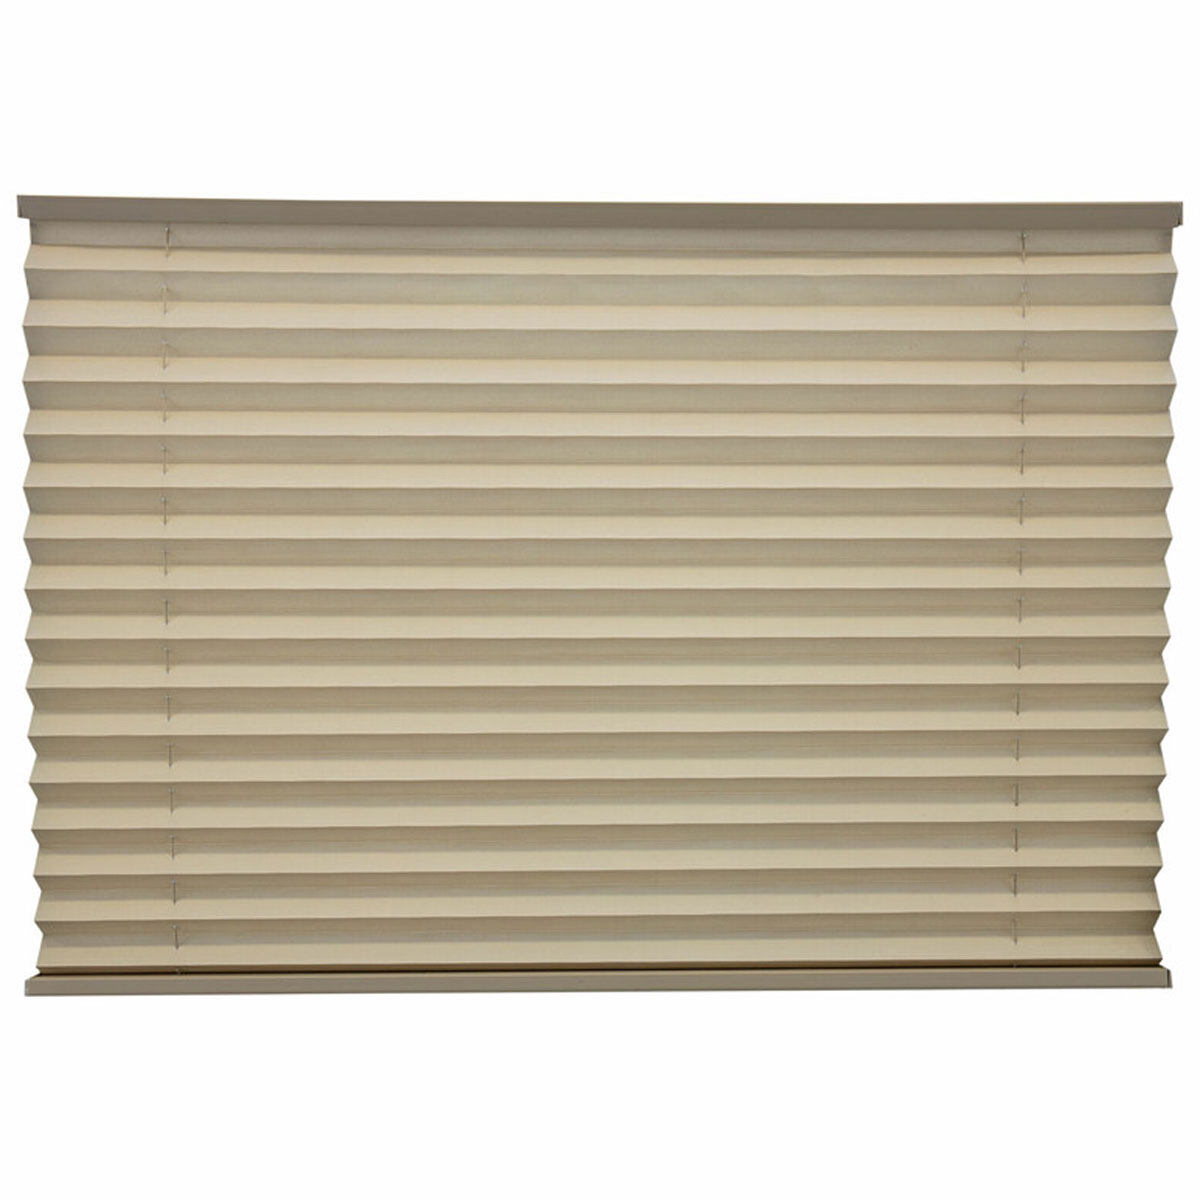 RV Pleated Blinds